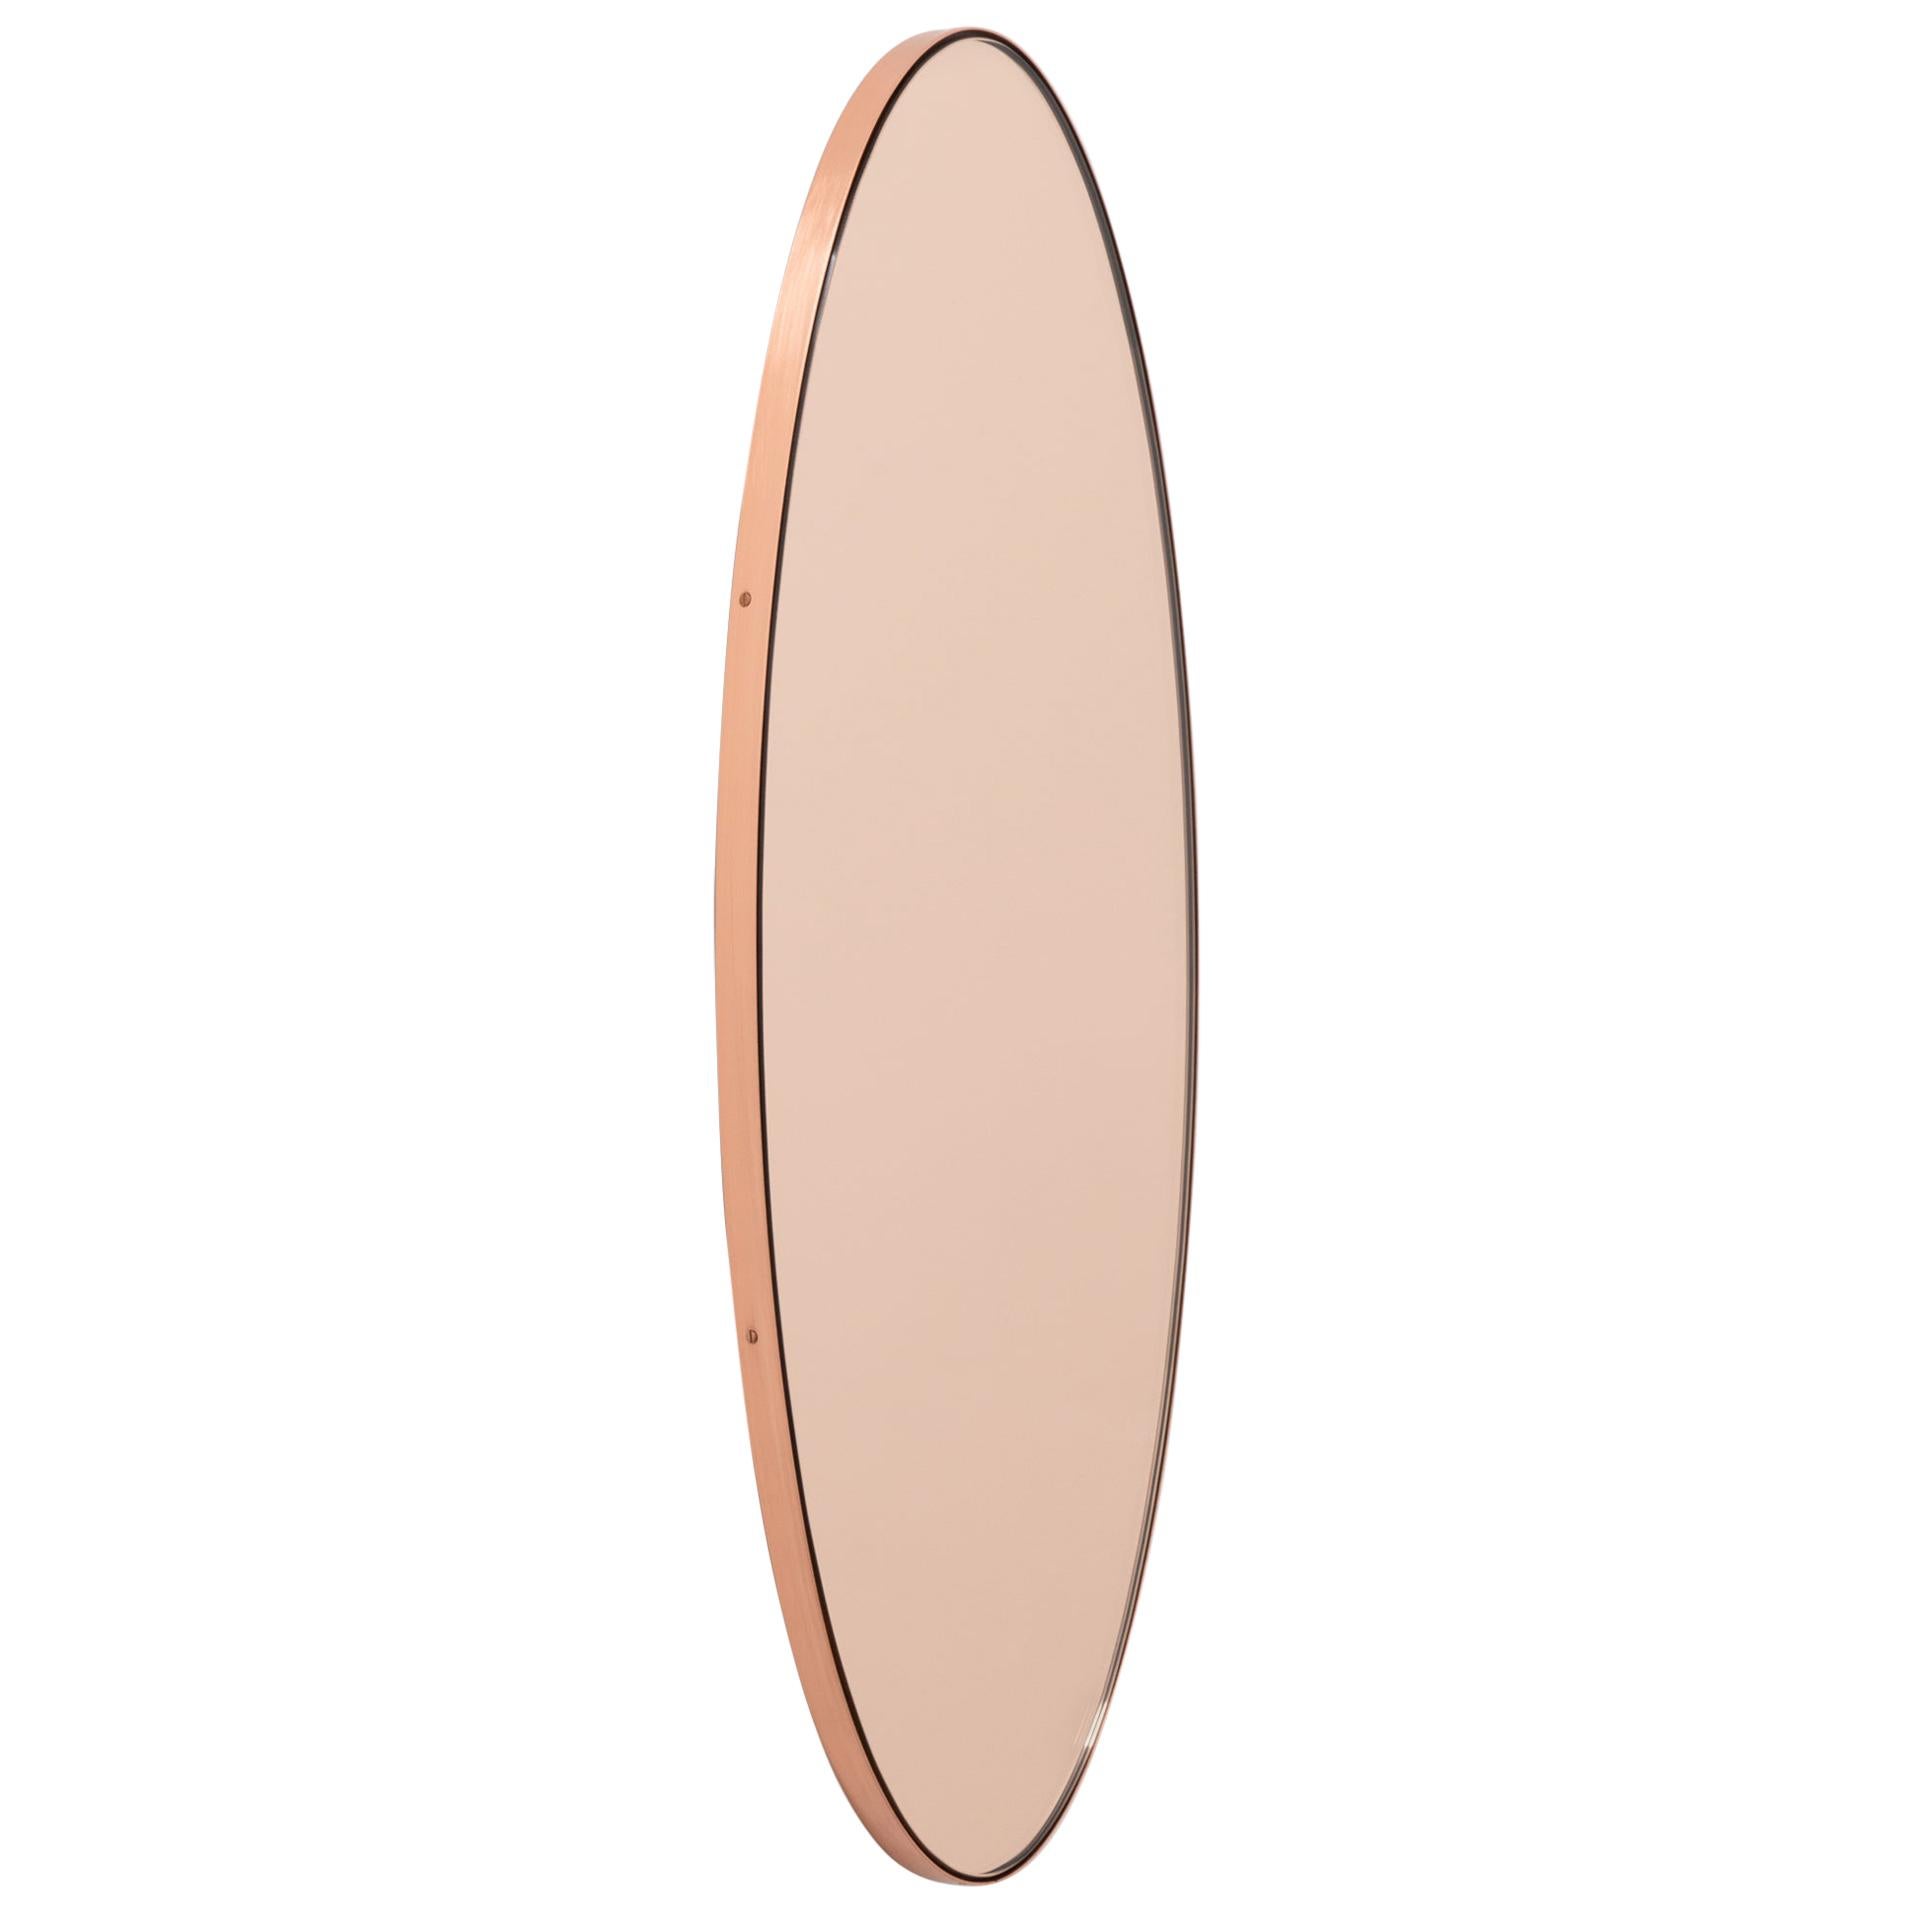 Ovalis Oval shaped Rose Gold Contemporary Mirror with a Copper Frame, Small For Sale